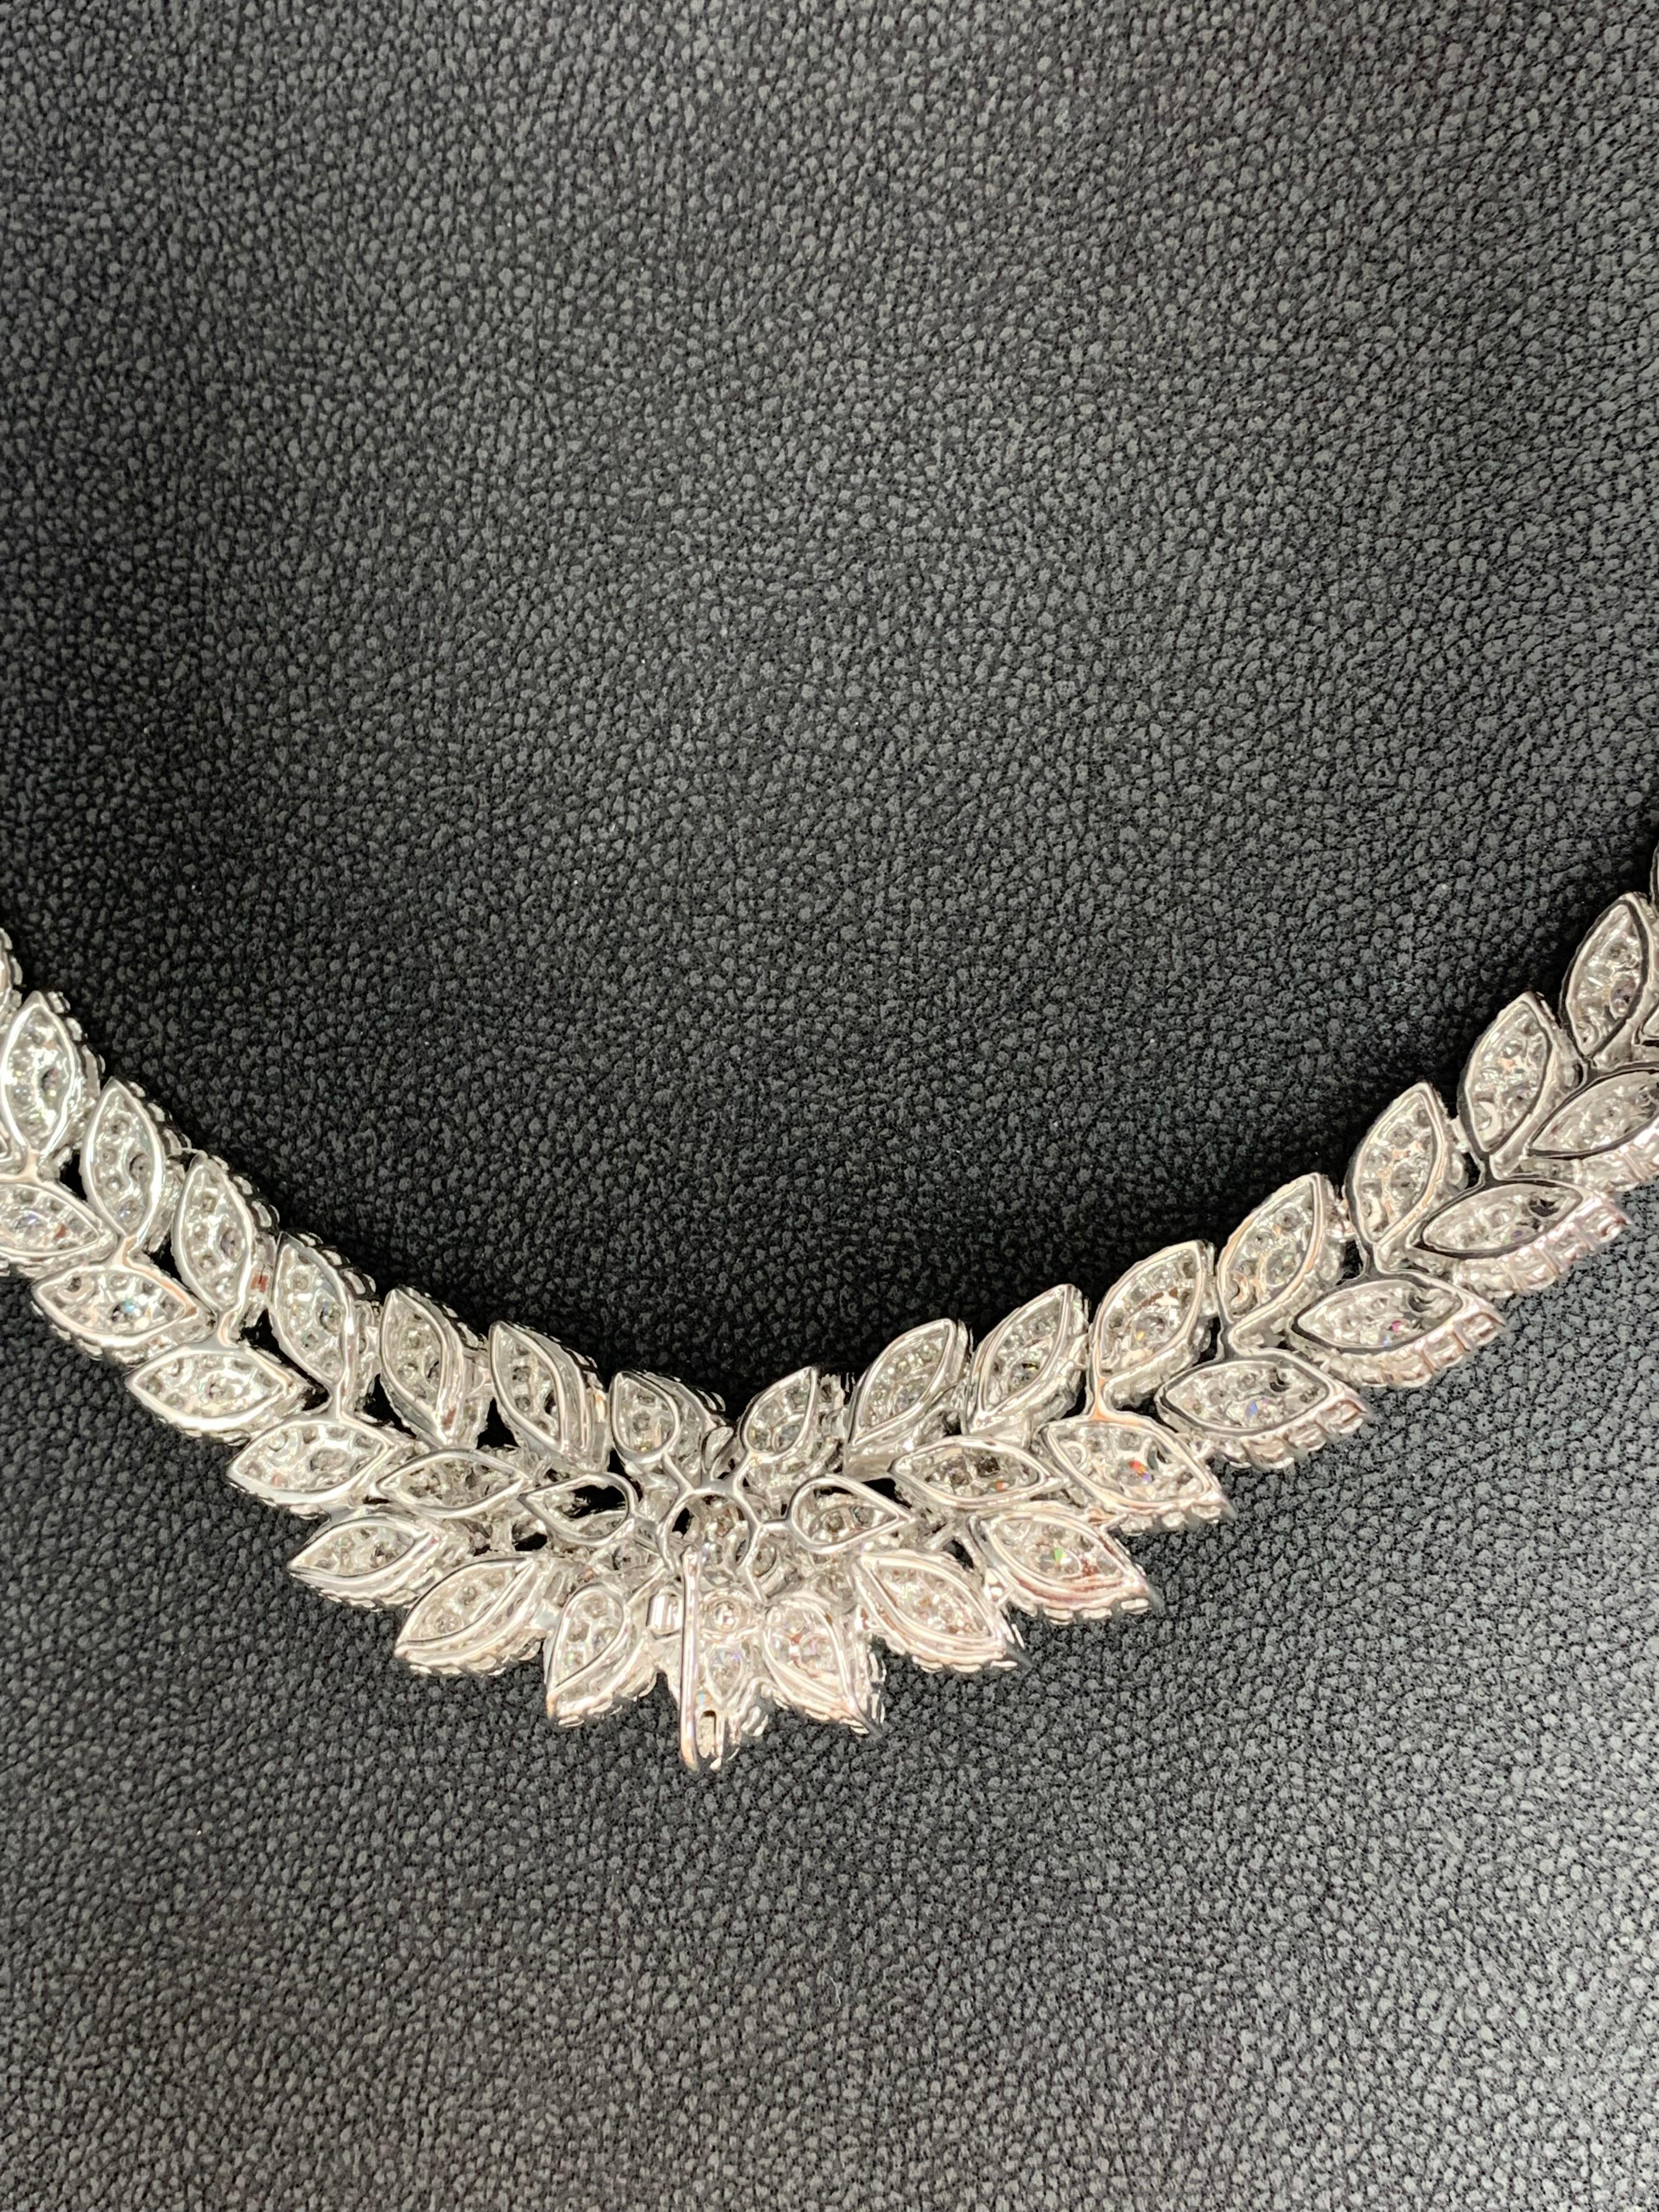 39.58 Carat Cluster Diamond Necklace in 18K White Gold For Sale 3